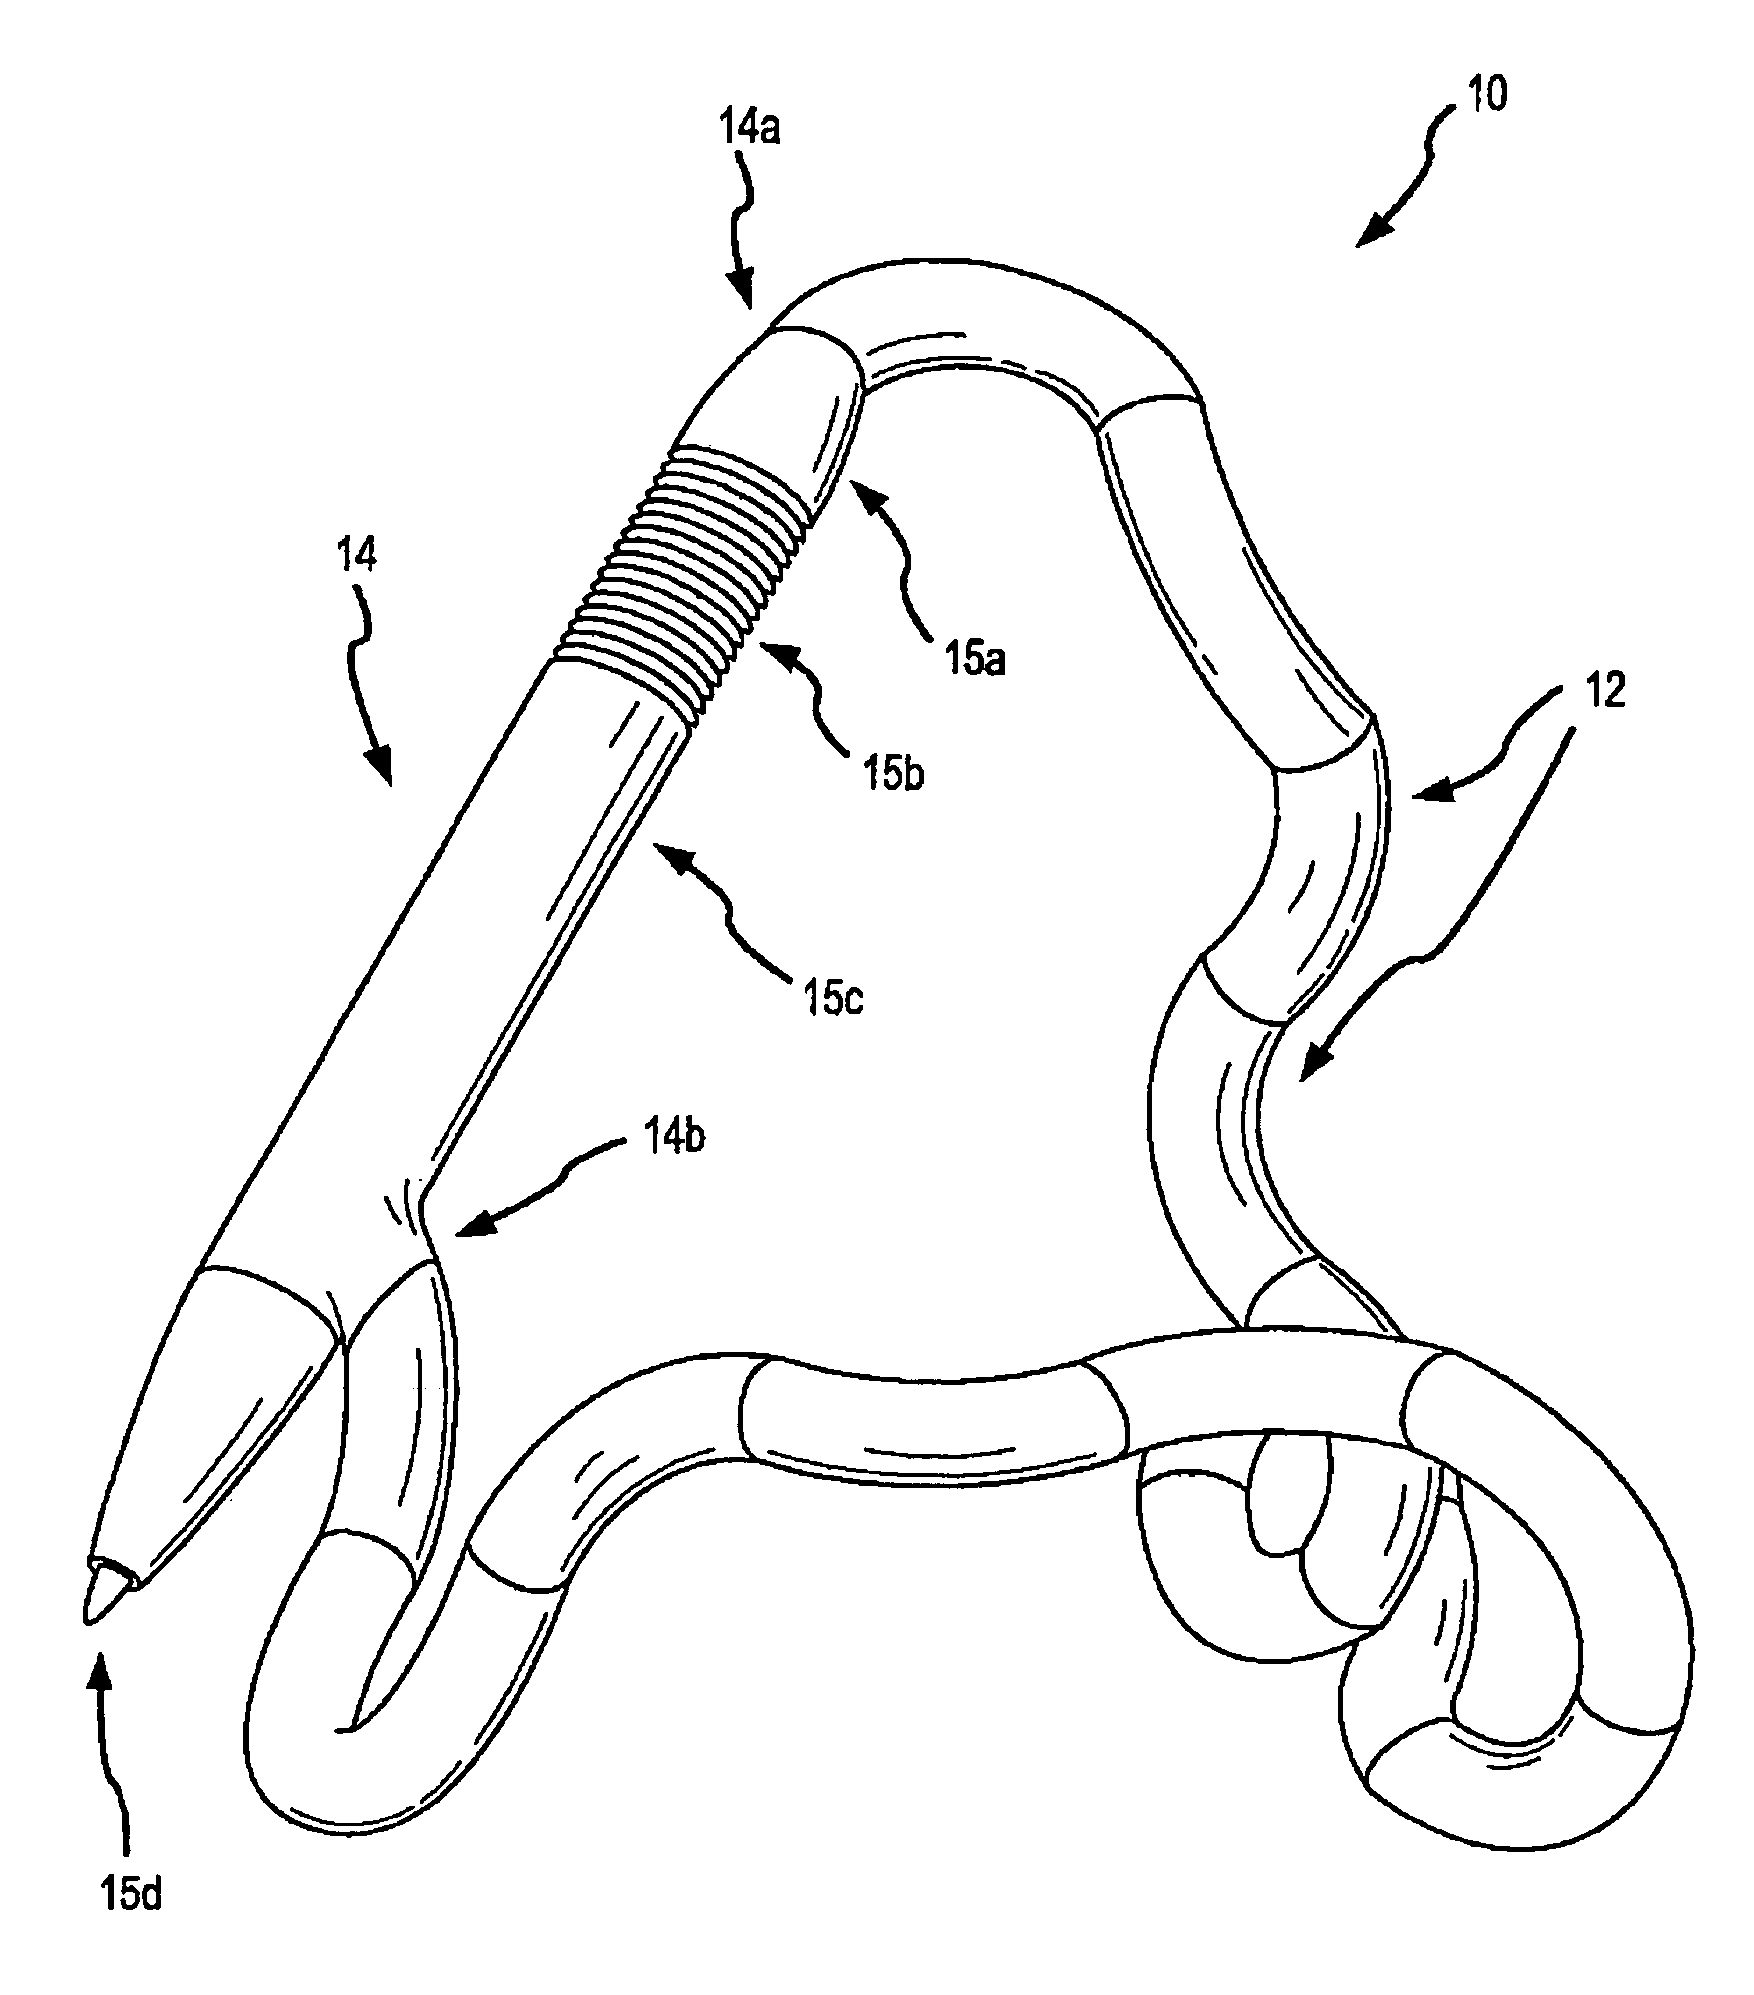 Therapeutic writing instrument devices and methods